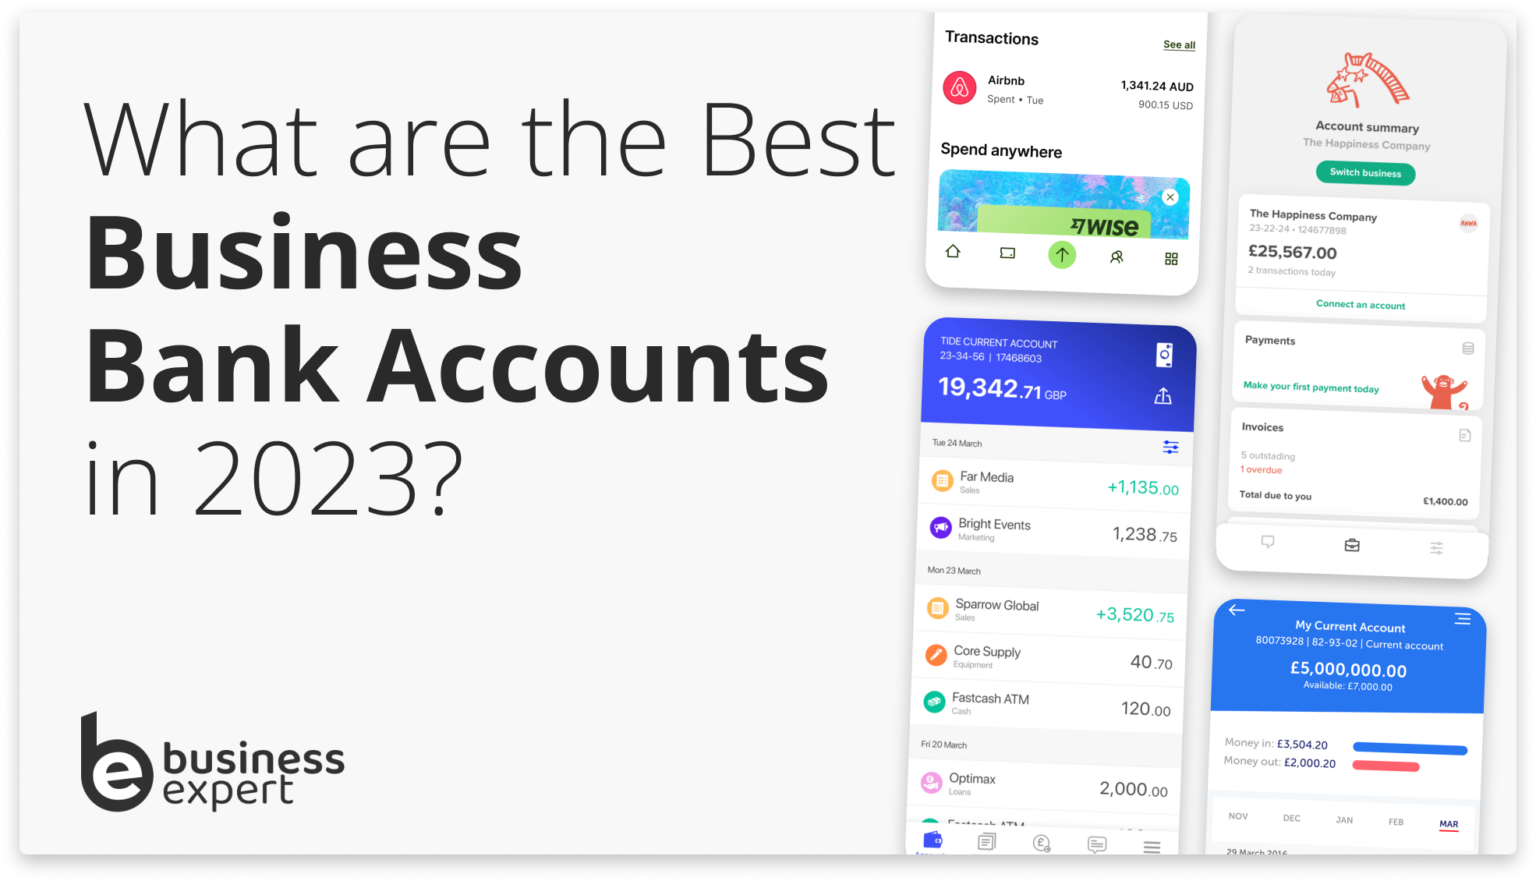 What are the Best Business Bank Accounts in 2023?